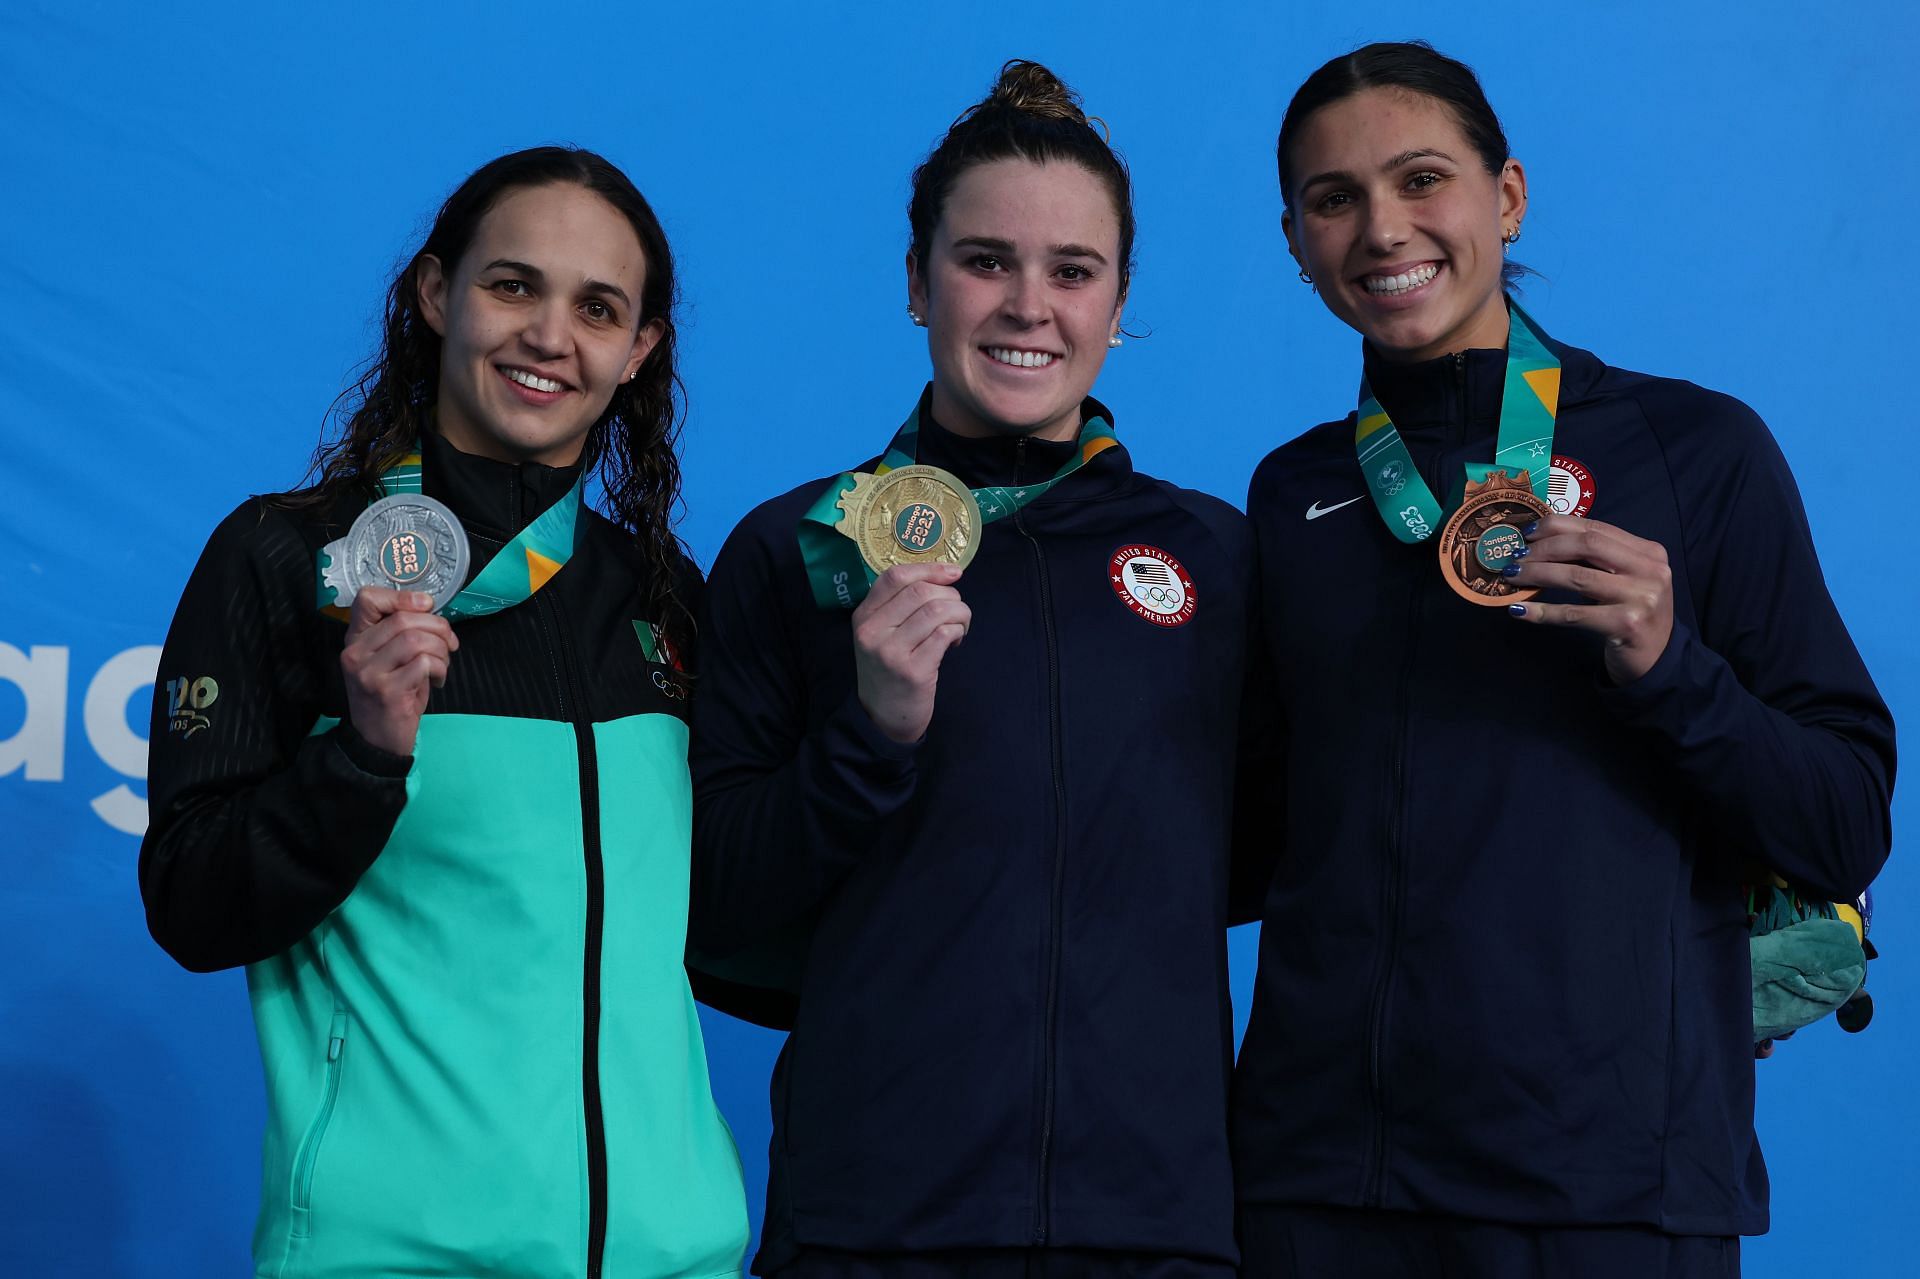 Silver medalist Maria Mata Cocco of Mexico, gold medalist Dakota Luthe,r and bronze medalist Kelly Pash of United States pose on the podium of Women&#039;s 200m Butterfly at 2023 Pan Am Games in Santiago, Chile.